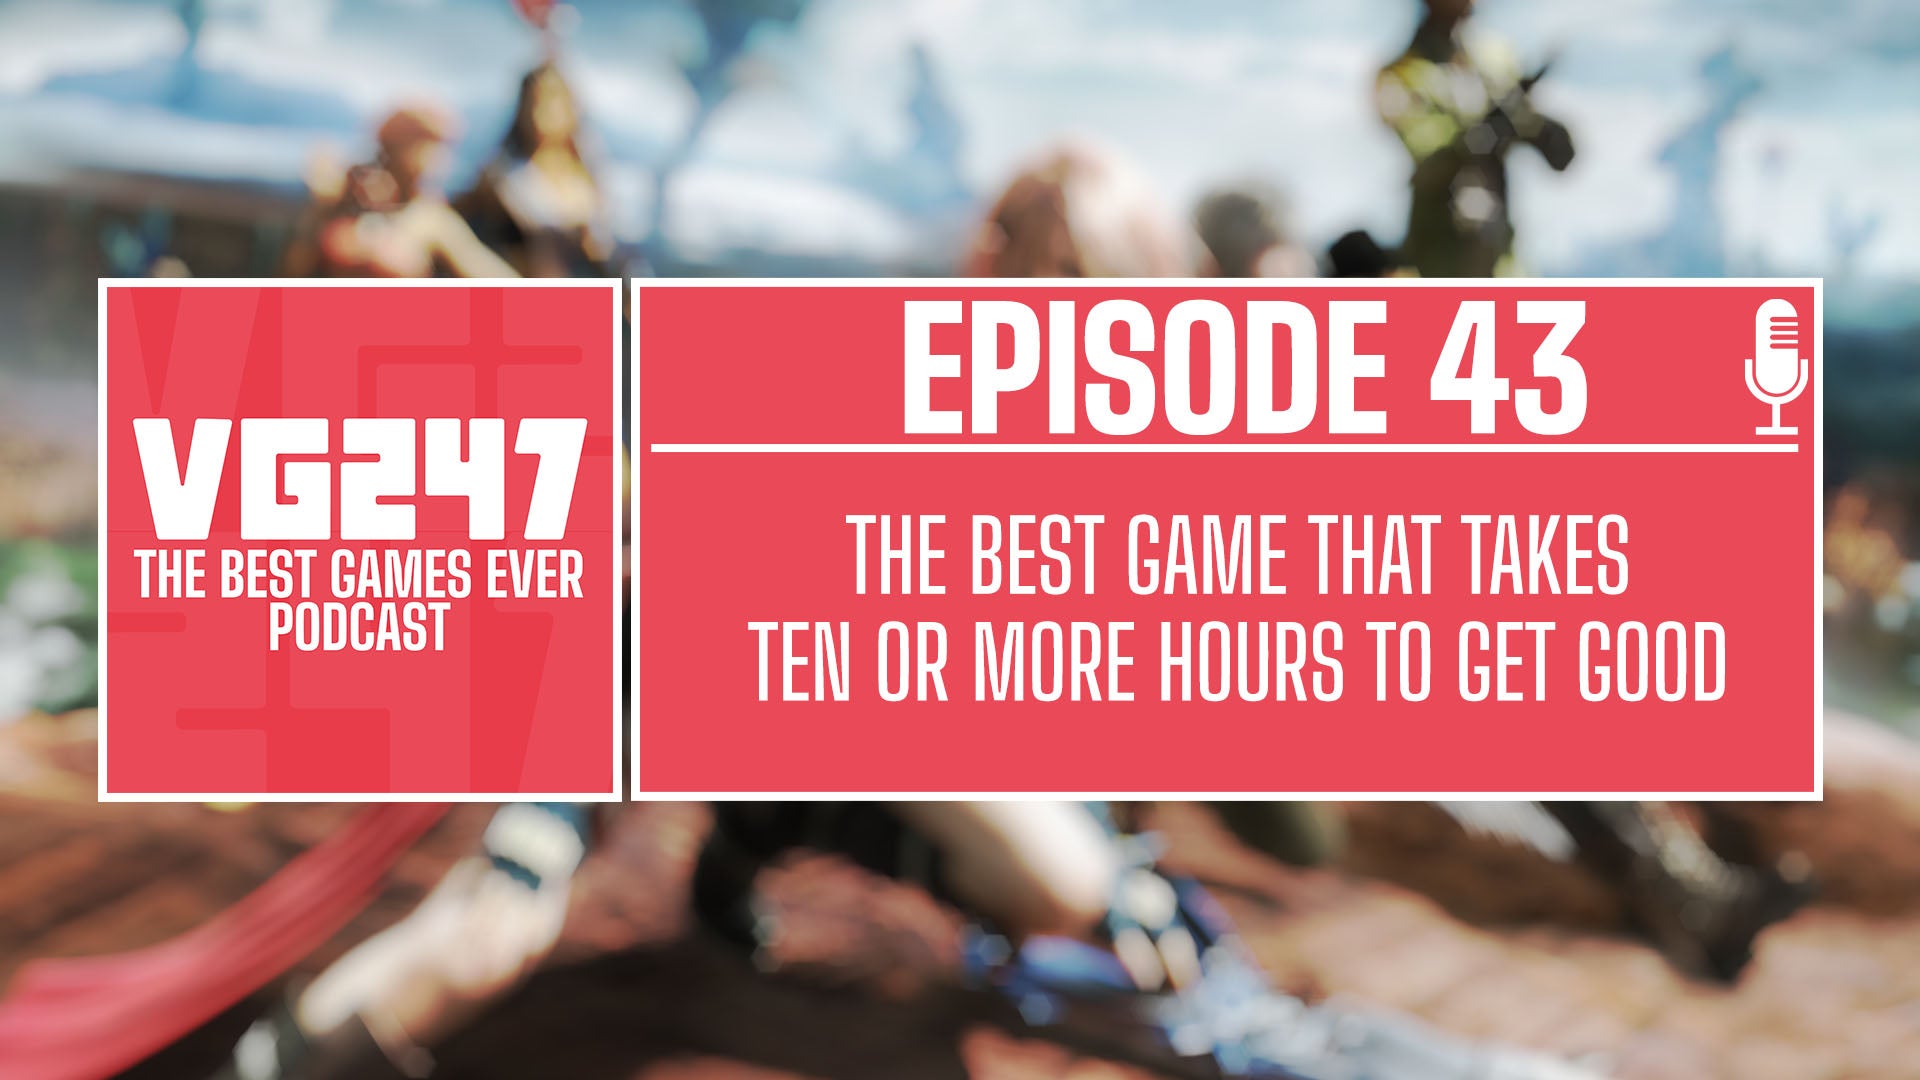 Image for VG247's The Best Games Ever Podcast – Ep.43: The best game that takes ten or more hours to get good